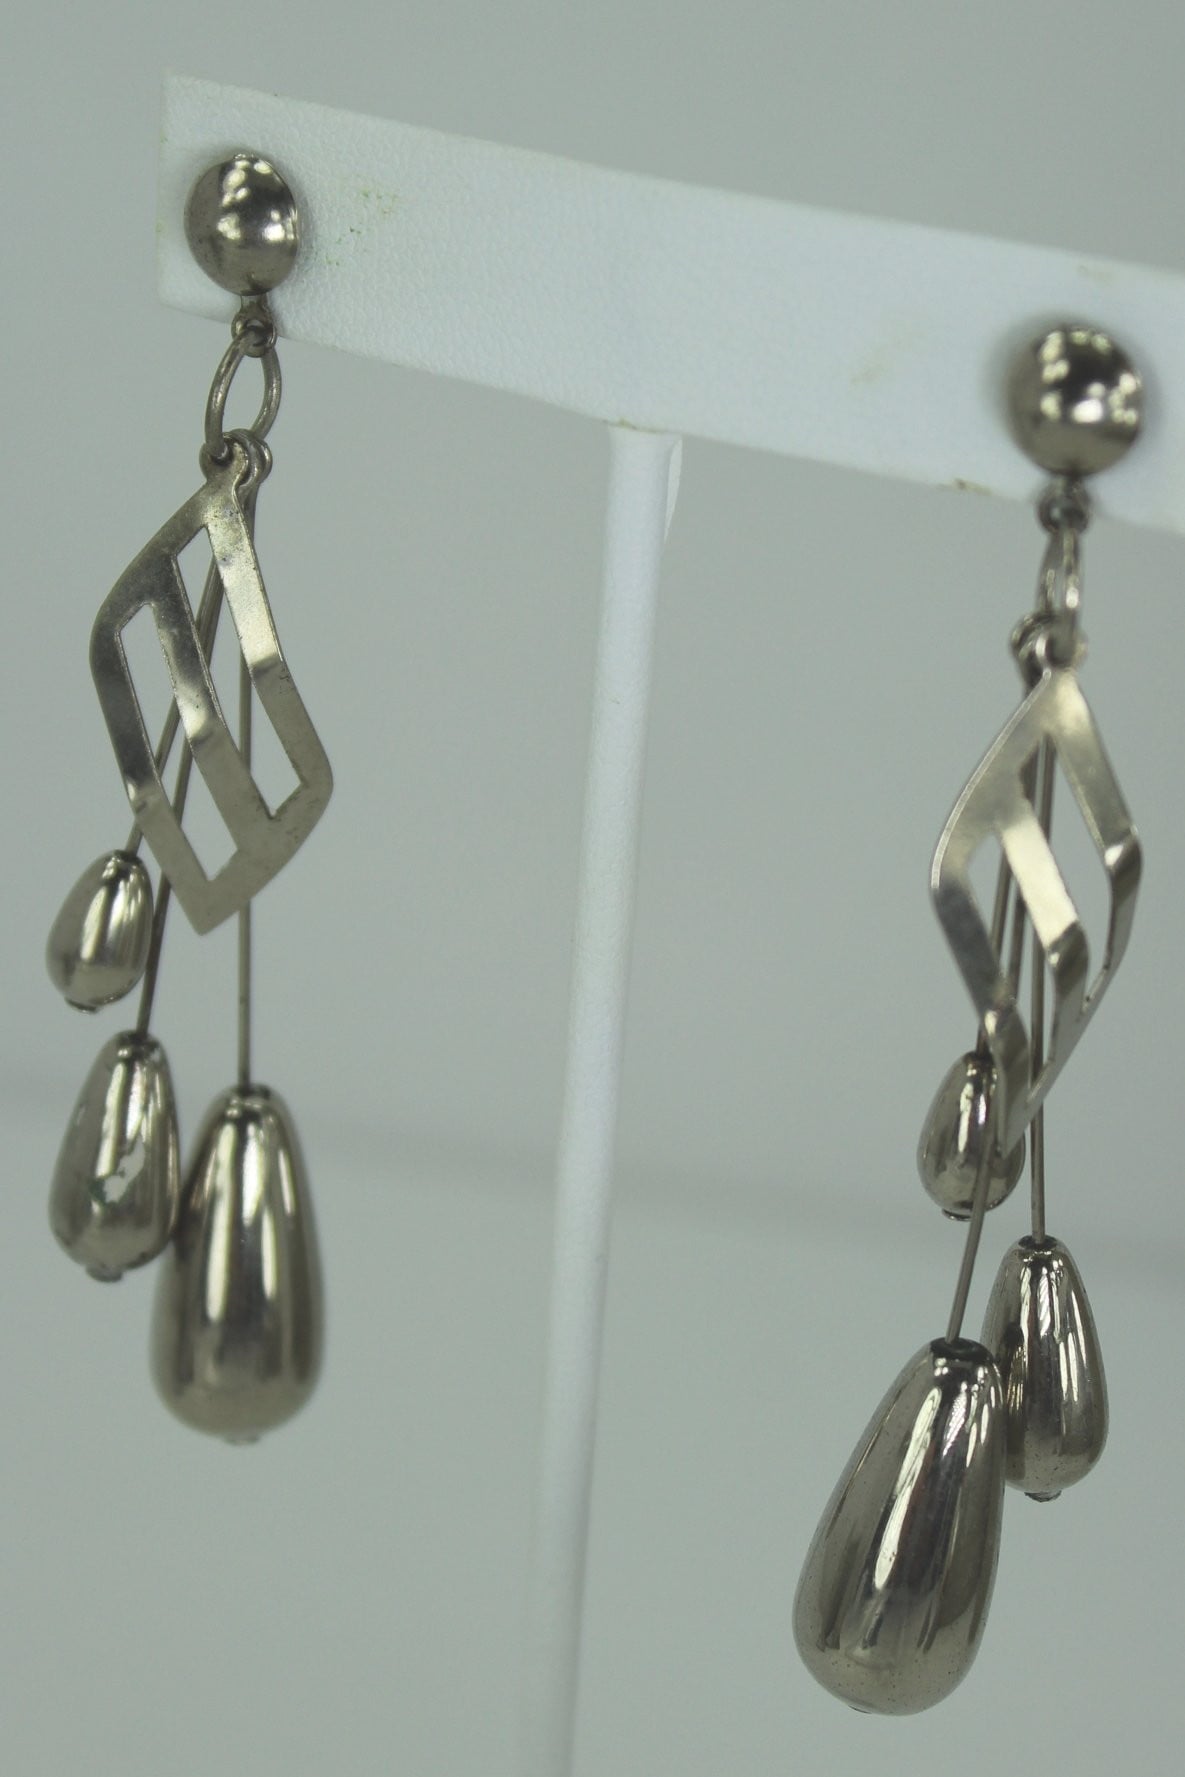 Long Modernist Earrings Post Lightweight Silver Tone Baubles Dangle Unique collectible